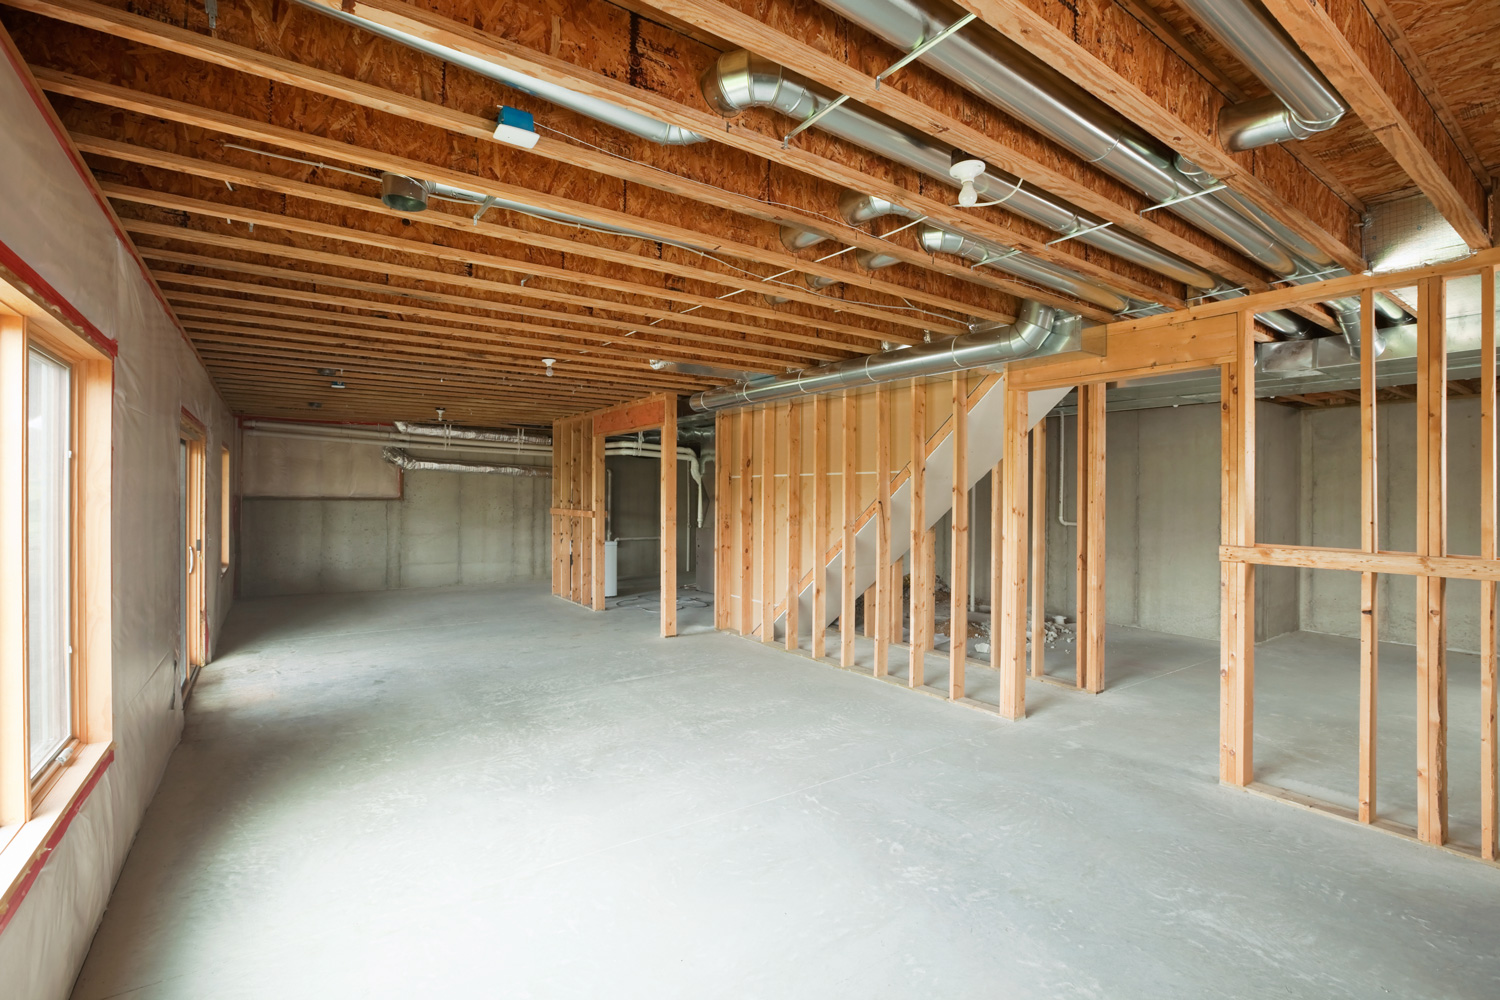 Basements are often left looking like this after initial construction, a cost saving move which allows for future expansion.